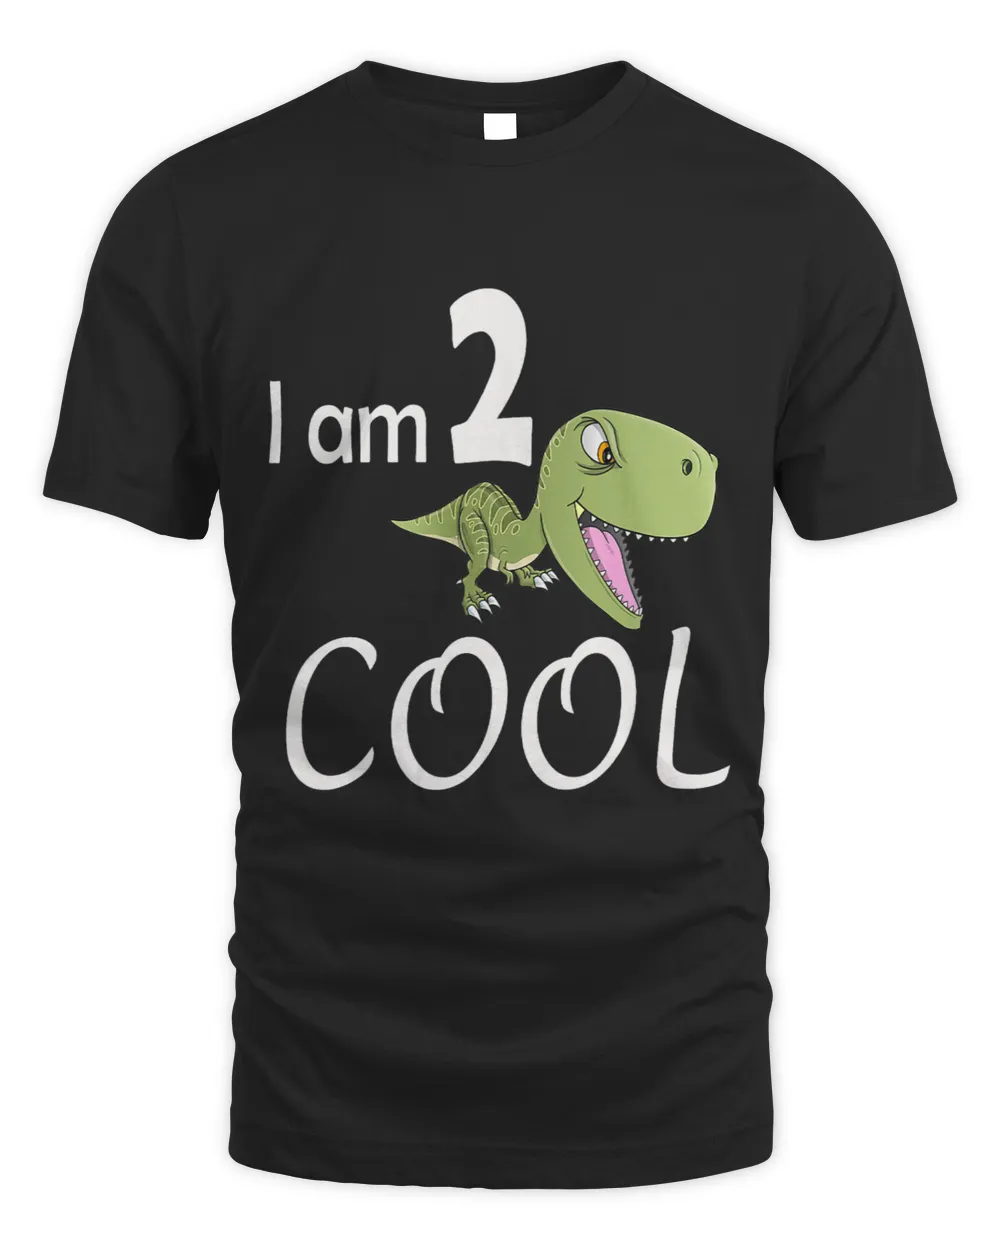 I am 2 Cool 2 year old TRex Kids Clothing